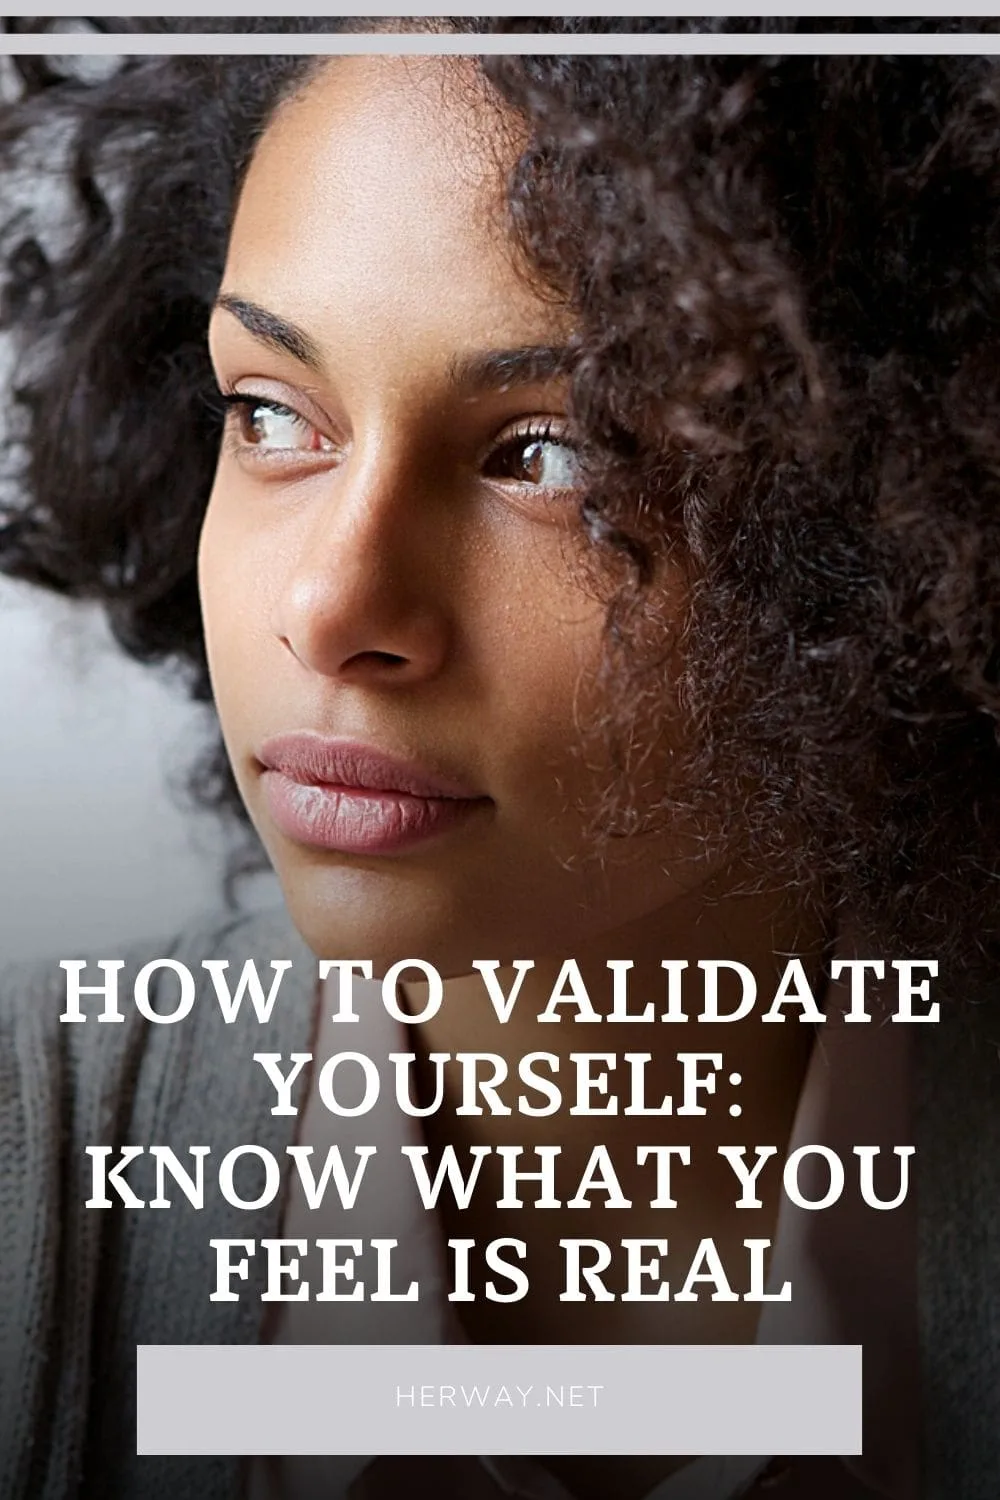 How To Validate Yourself: Know What You Feel Is Real